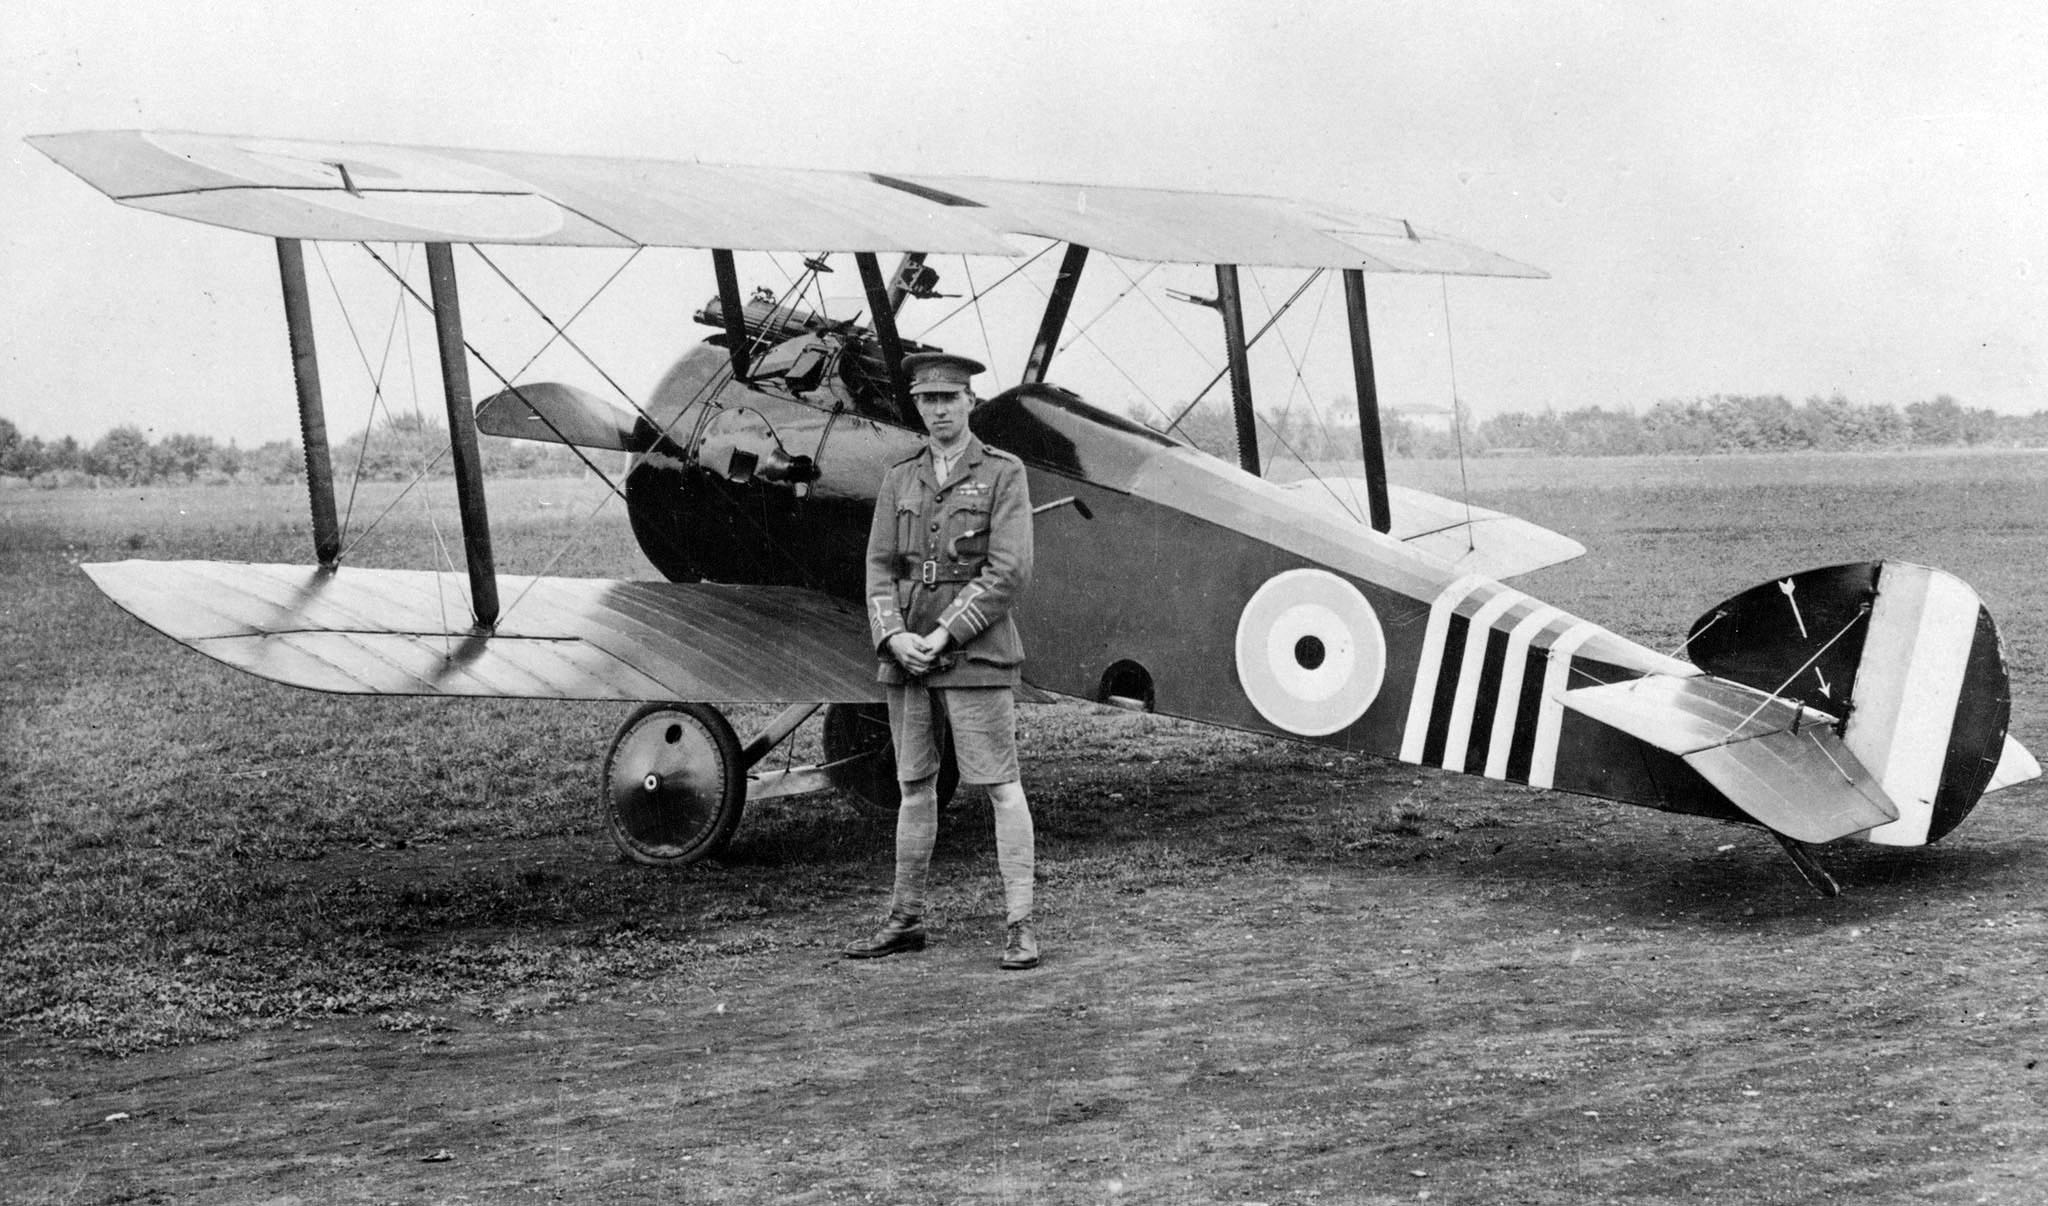 Wing Commander William Barker with his Sopwith Camel, B6313. According to author Wayne Ralph, this aircraft has been declared by British aviation historians to be the most successful fighting aircraft in Royal Air Force history. PHOTO: DND Archives, AH-517